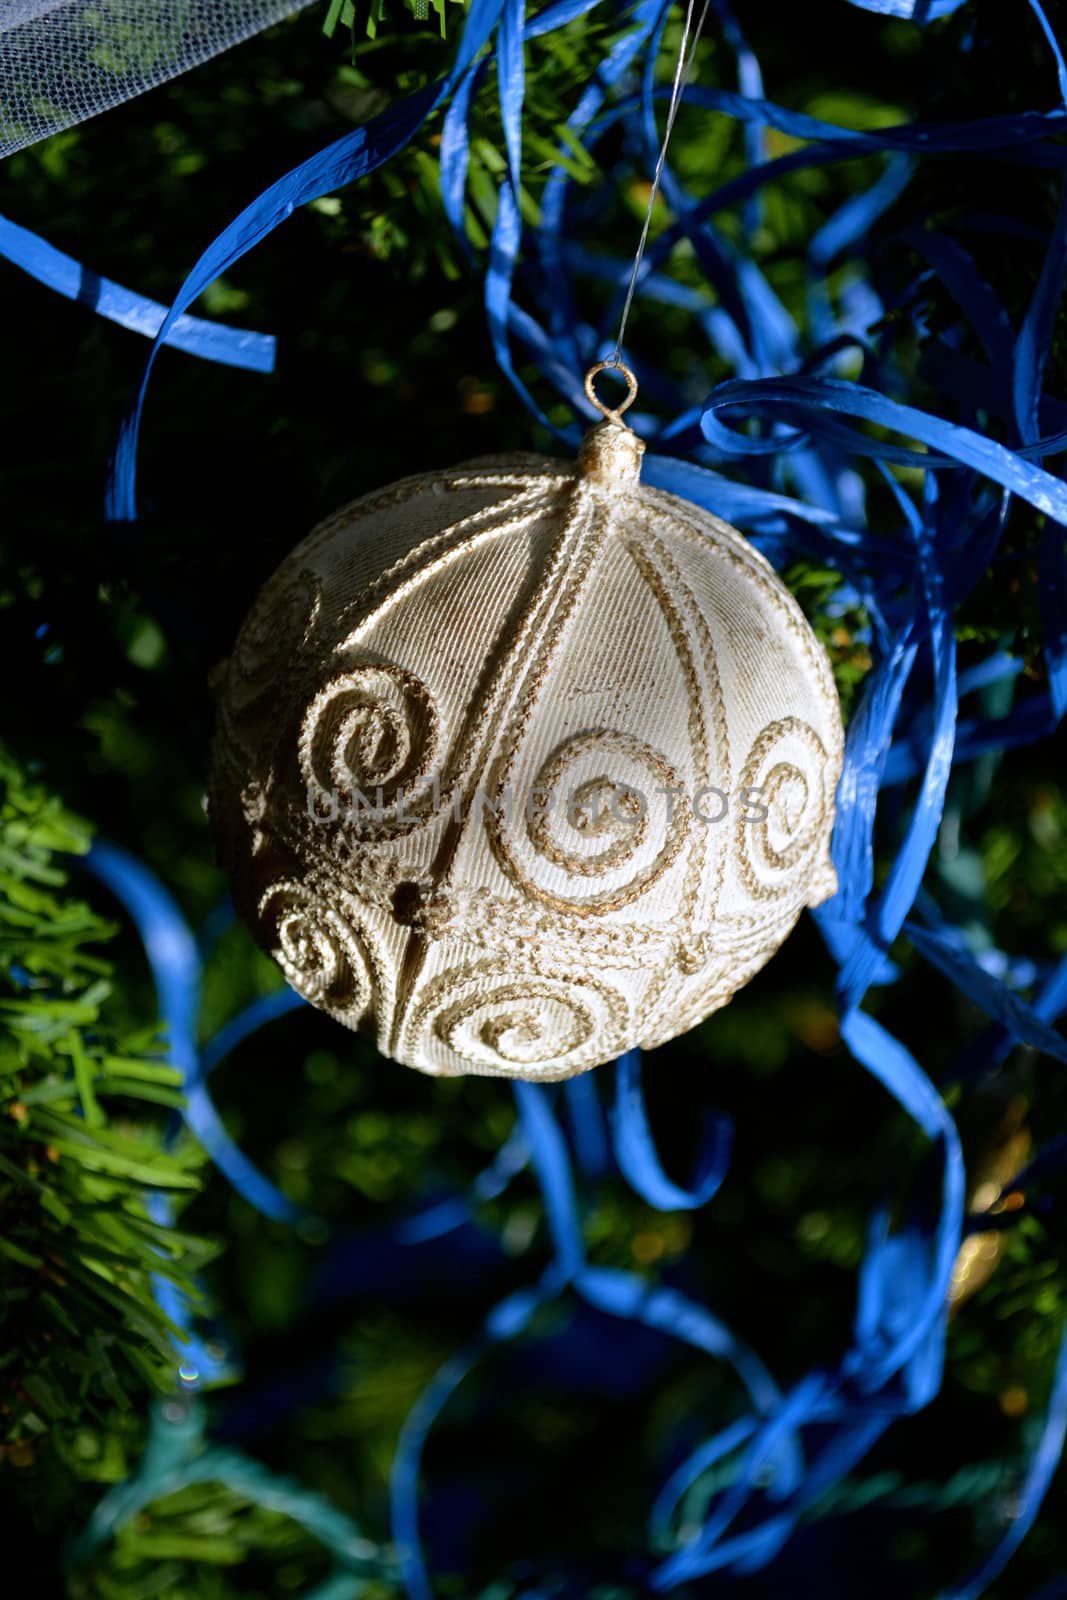 Victorian Ornament by RefocusPhoto